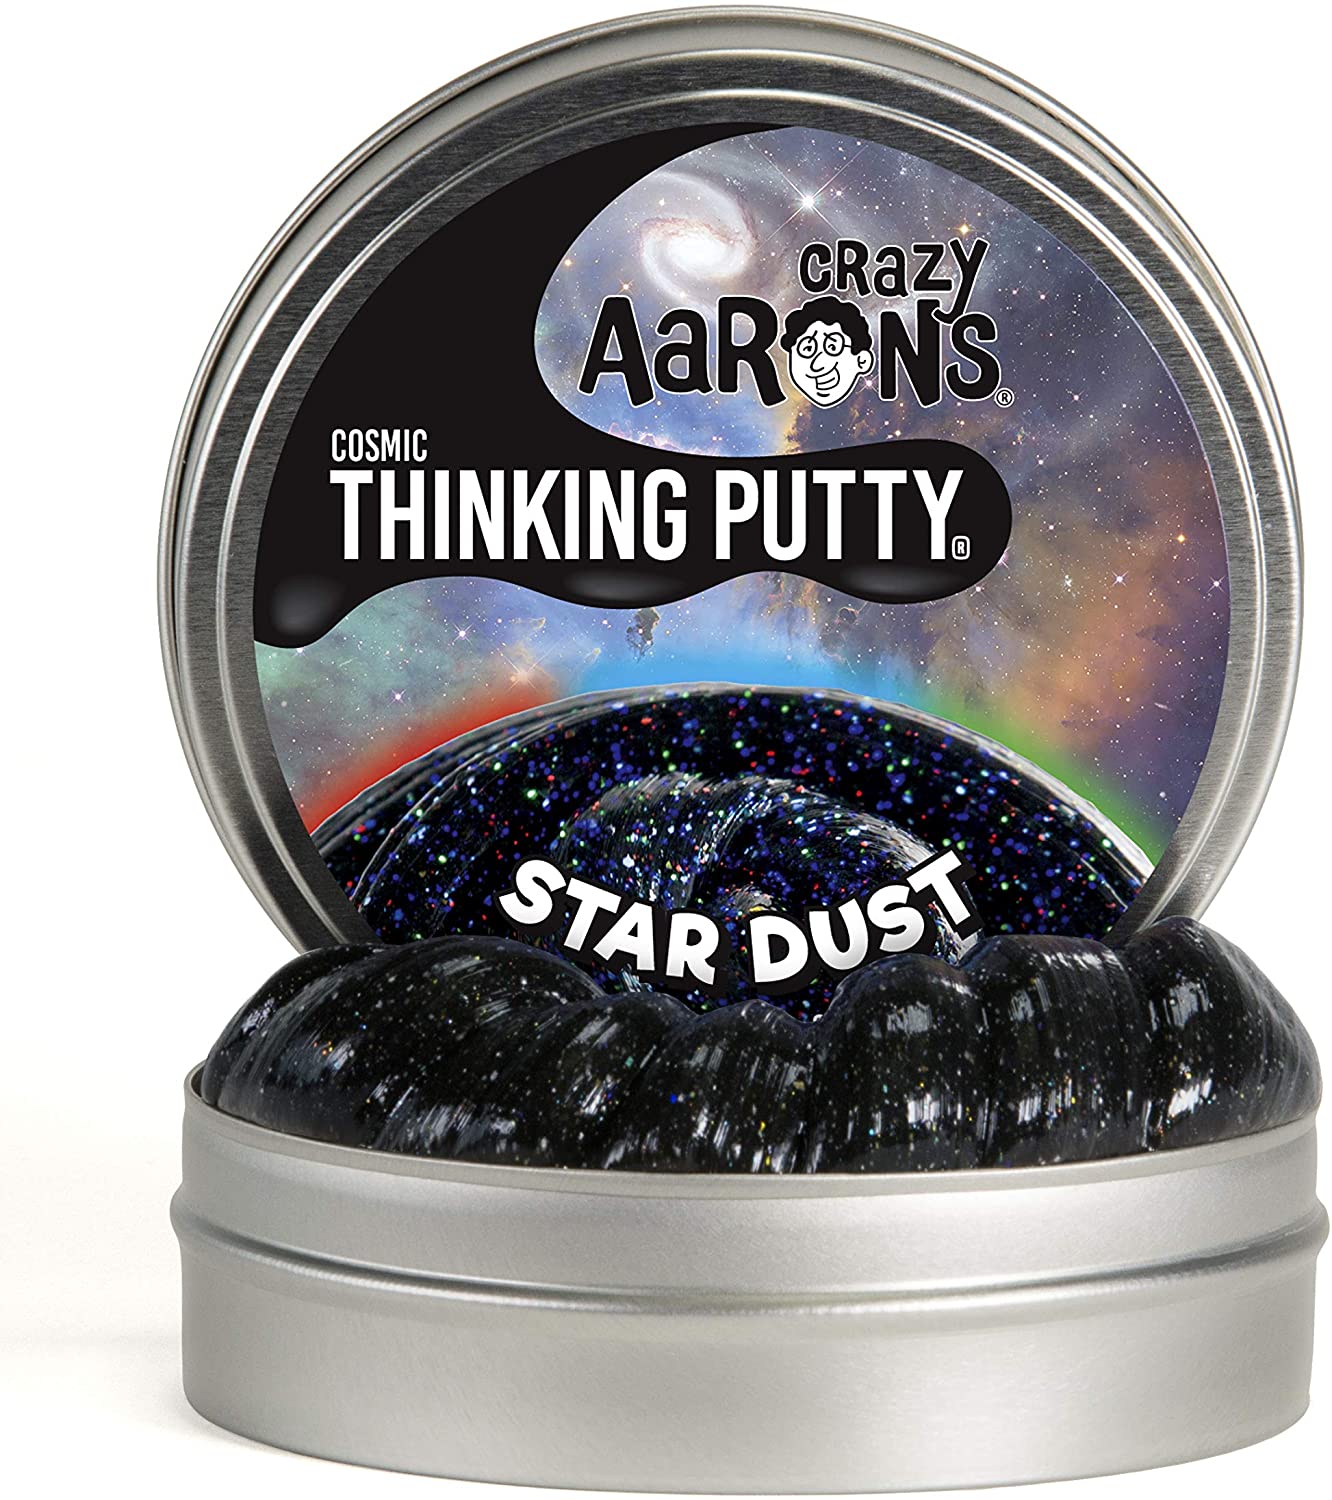 Crazy Aaron's Thinking Putty - Cosmic Glows